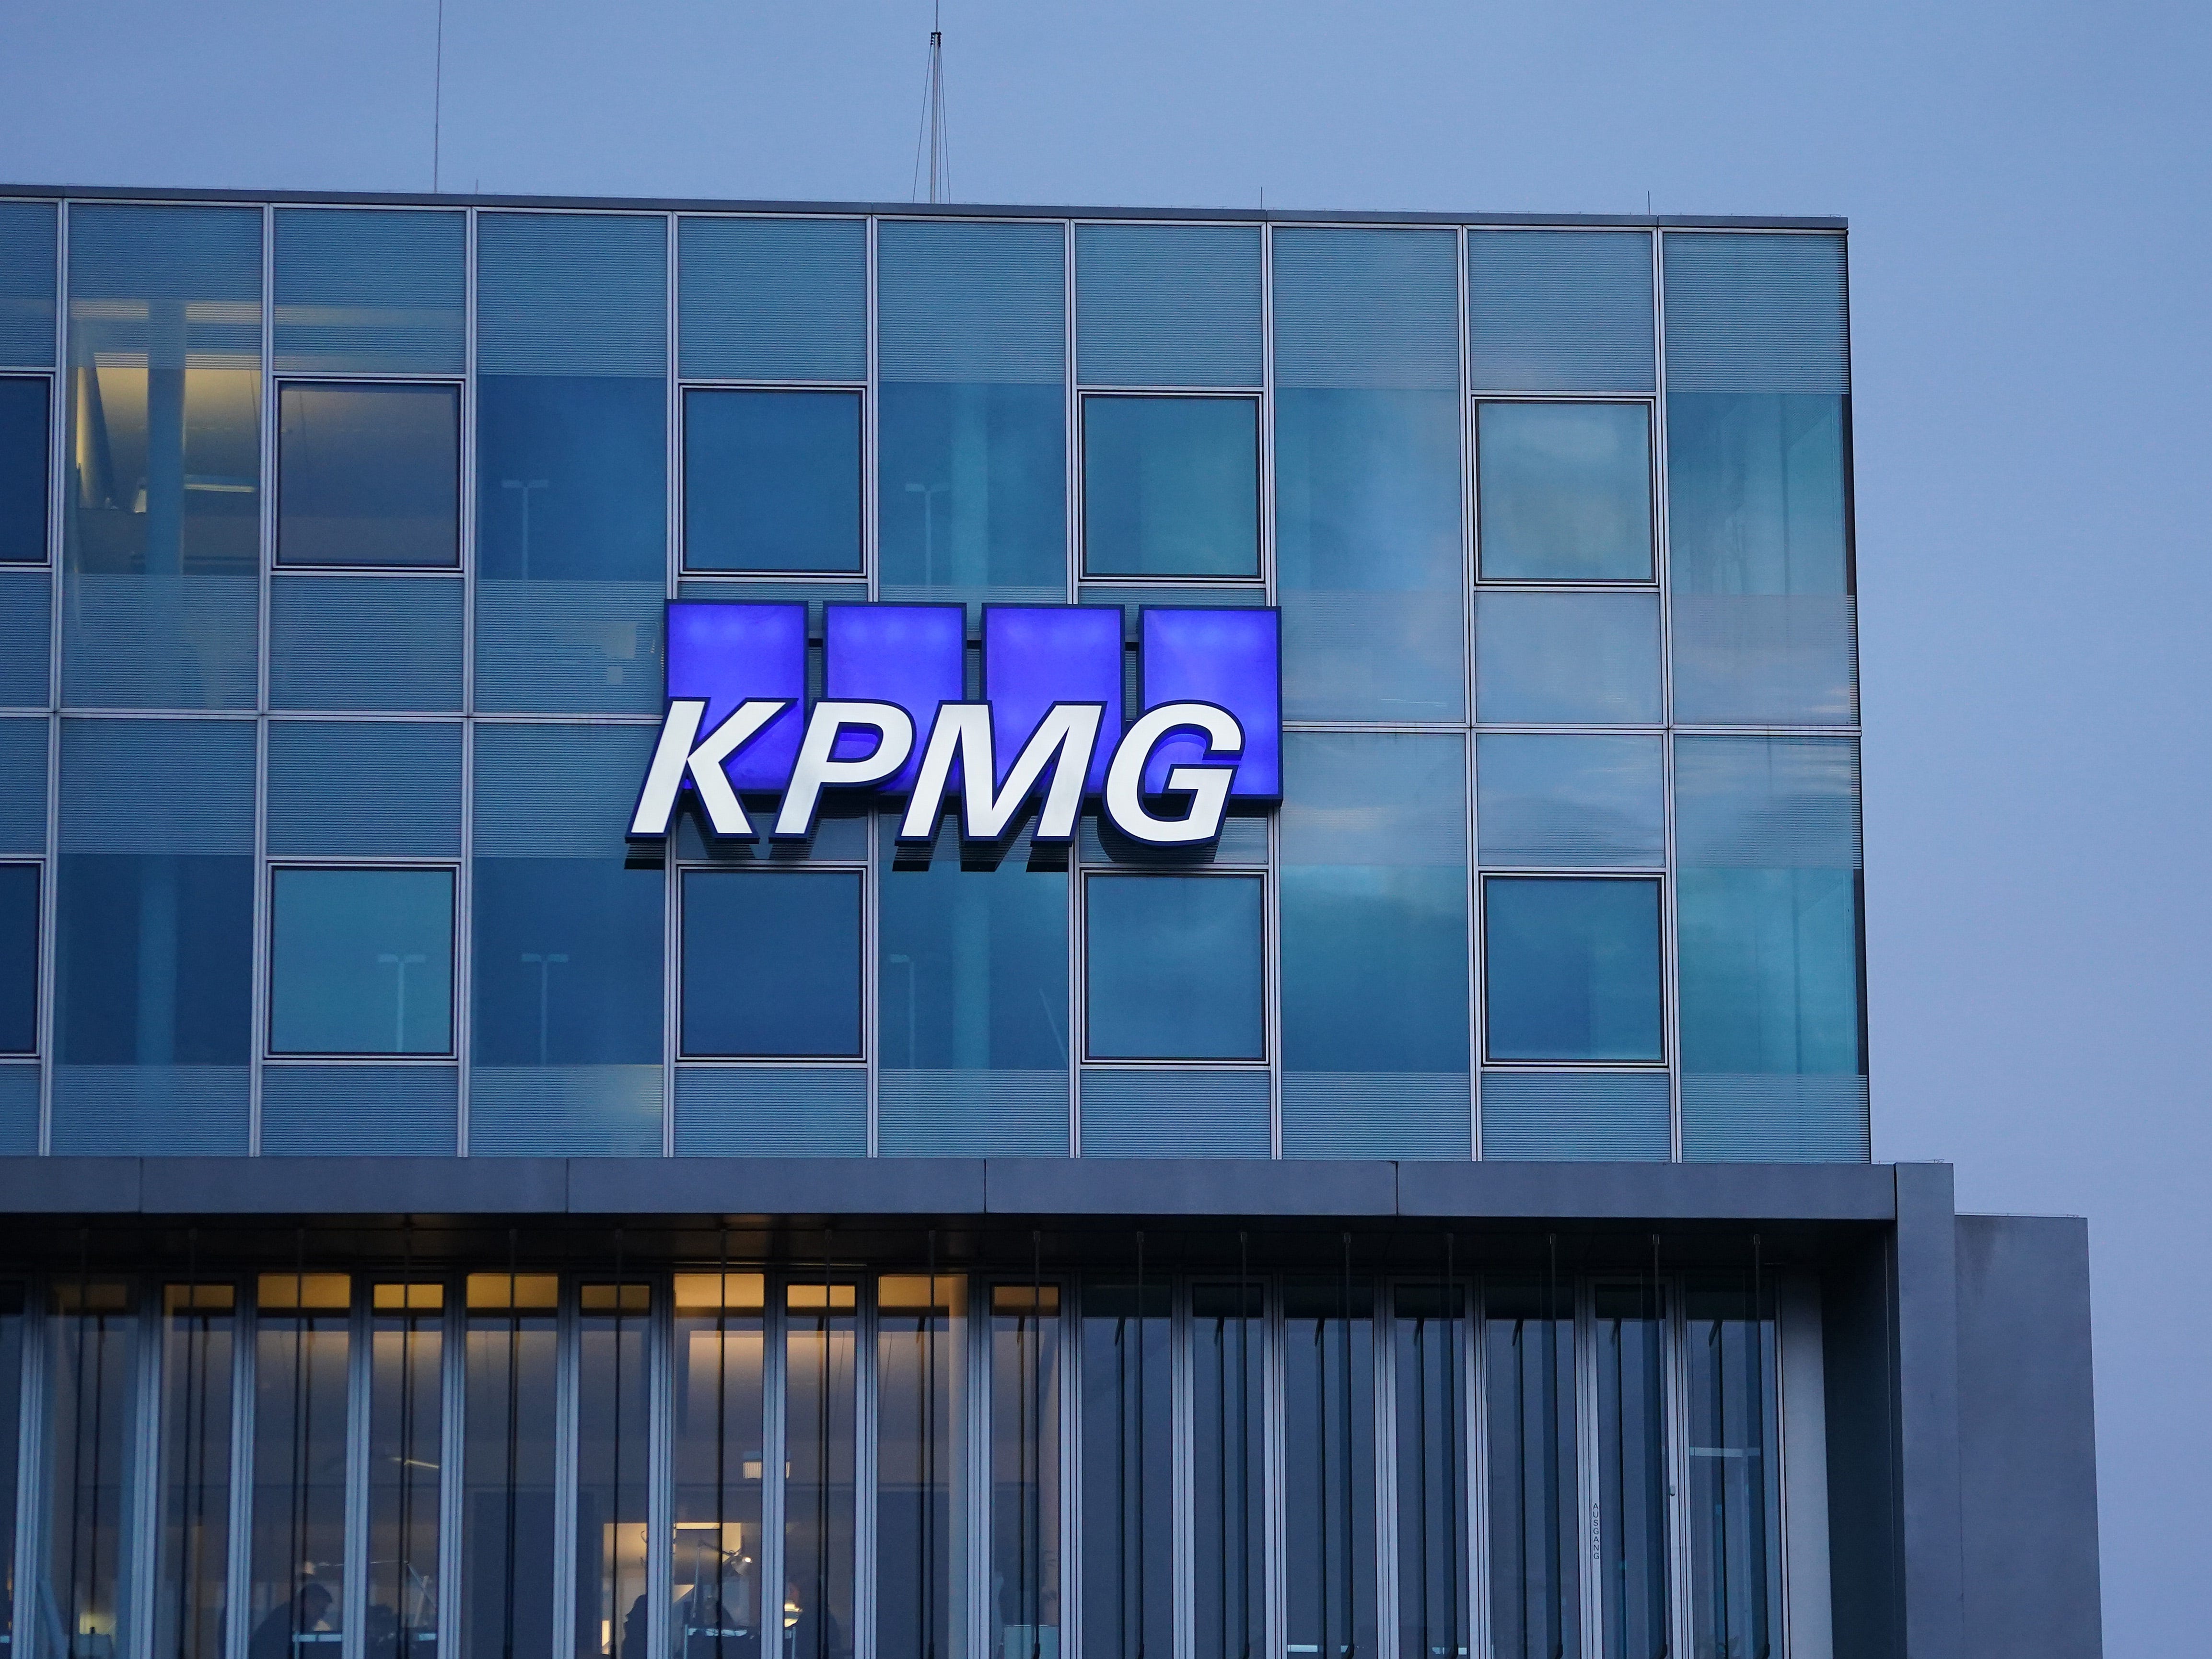 SML counters KPMG: Denies GH¢1bn payment claim, citing inaccuracy